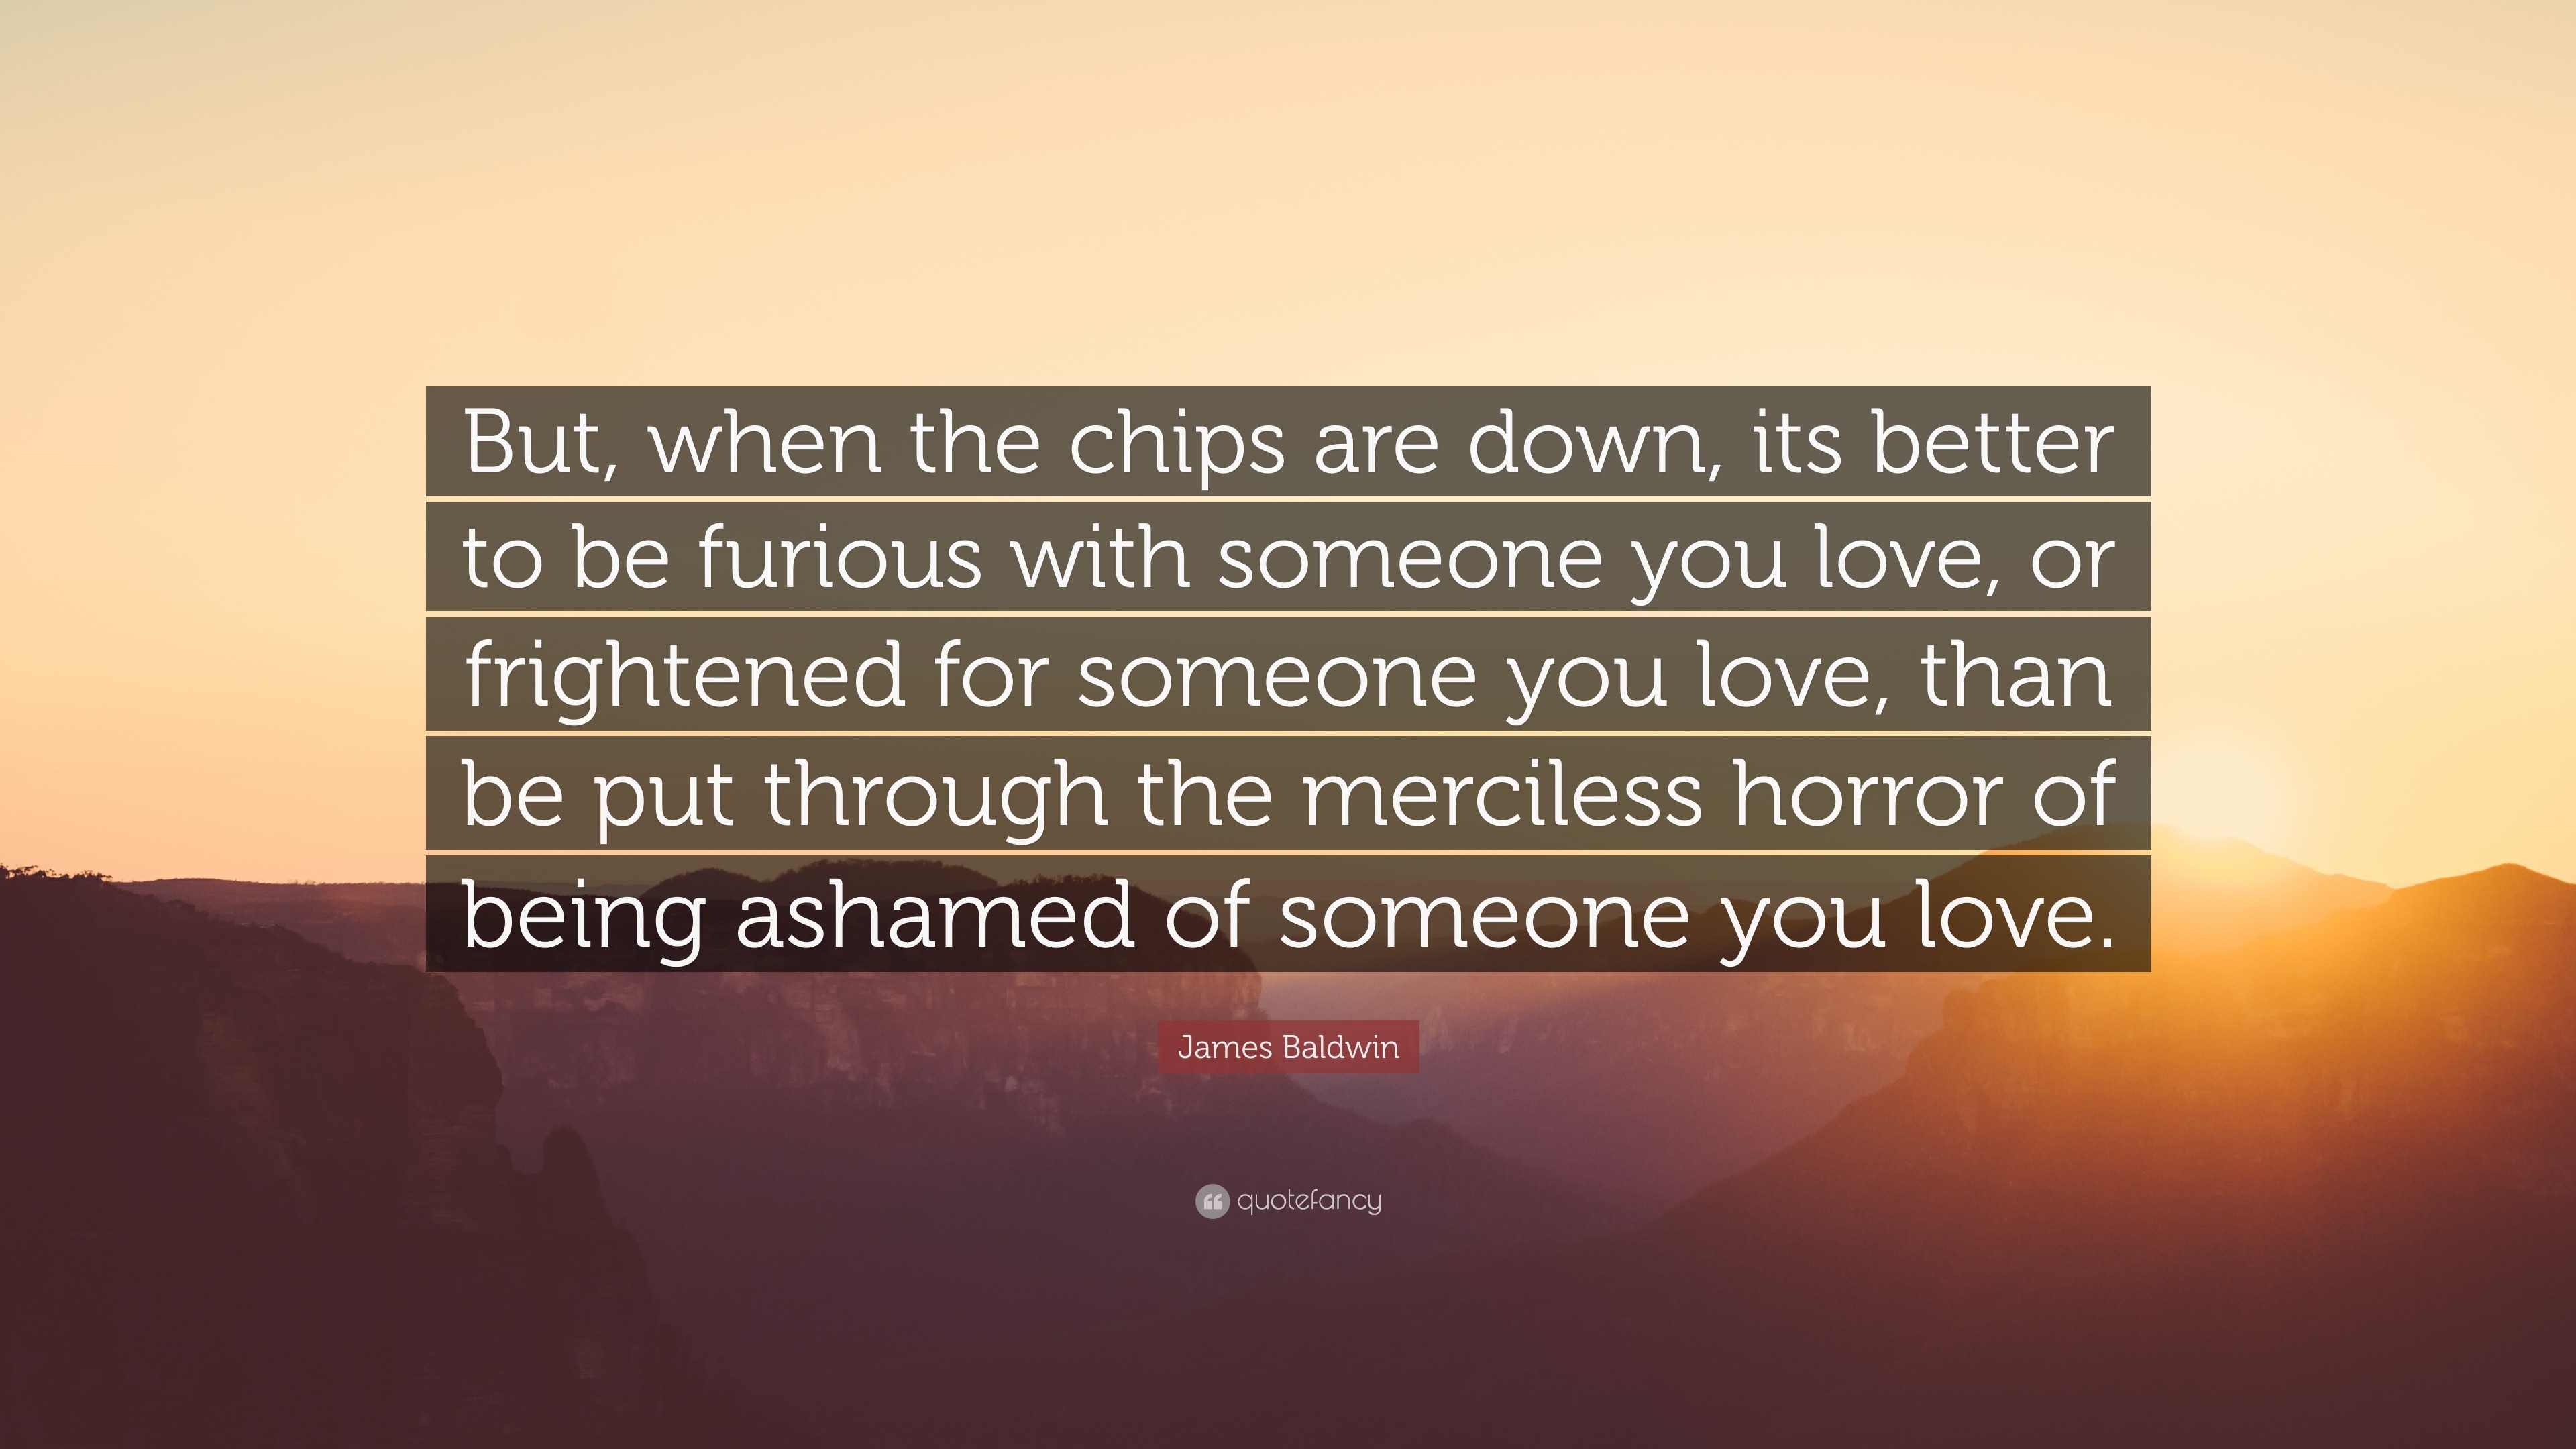 James Baldwin Quote “But when the chips are down its better to